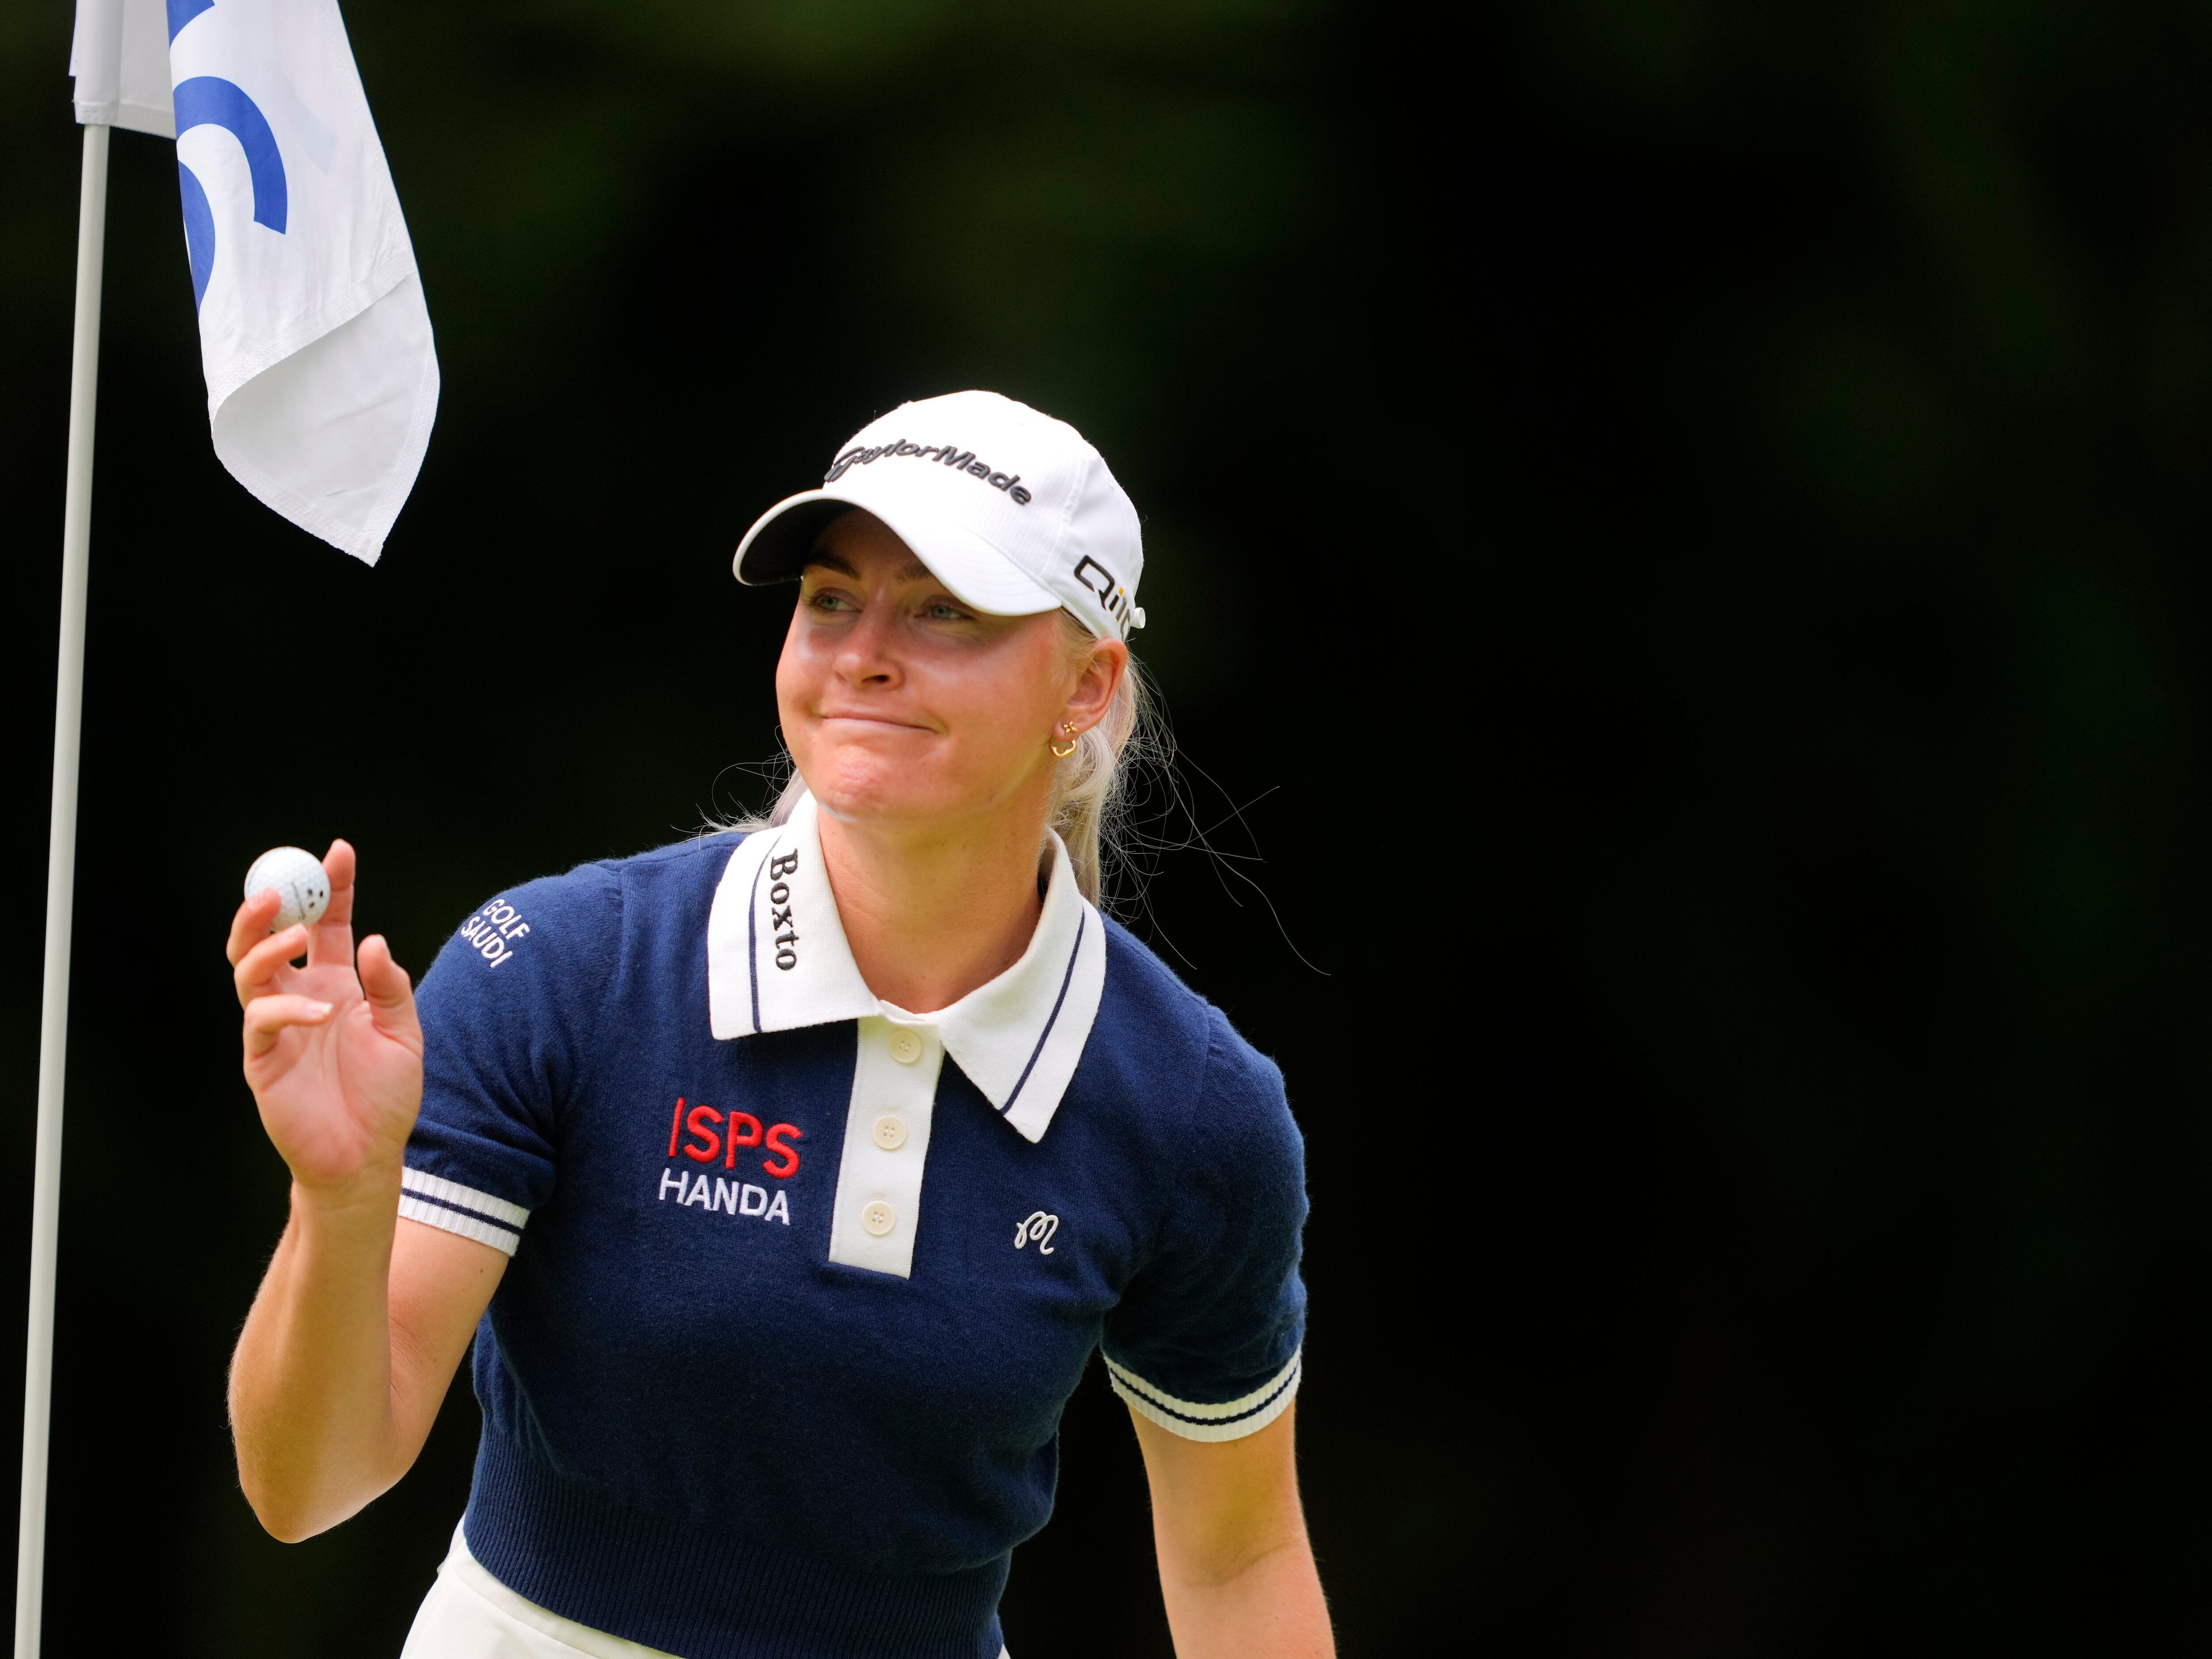 Charley Hull hit by late error as Amy Yang holds lead at Women’s PGA